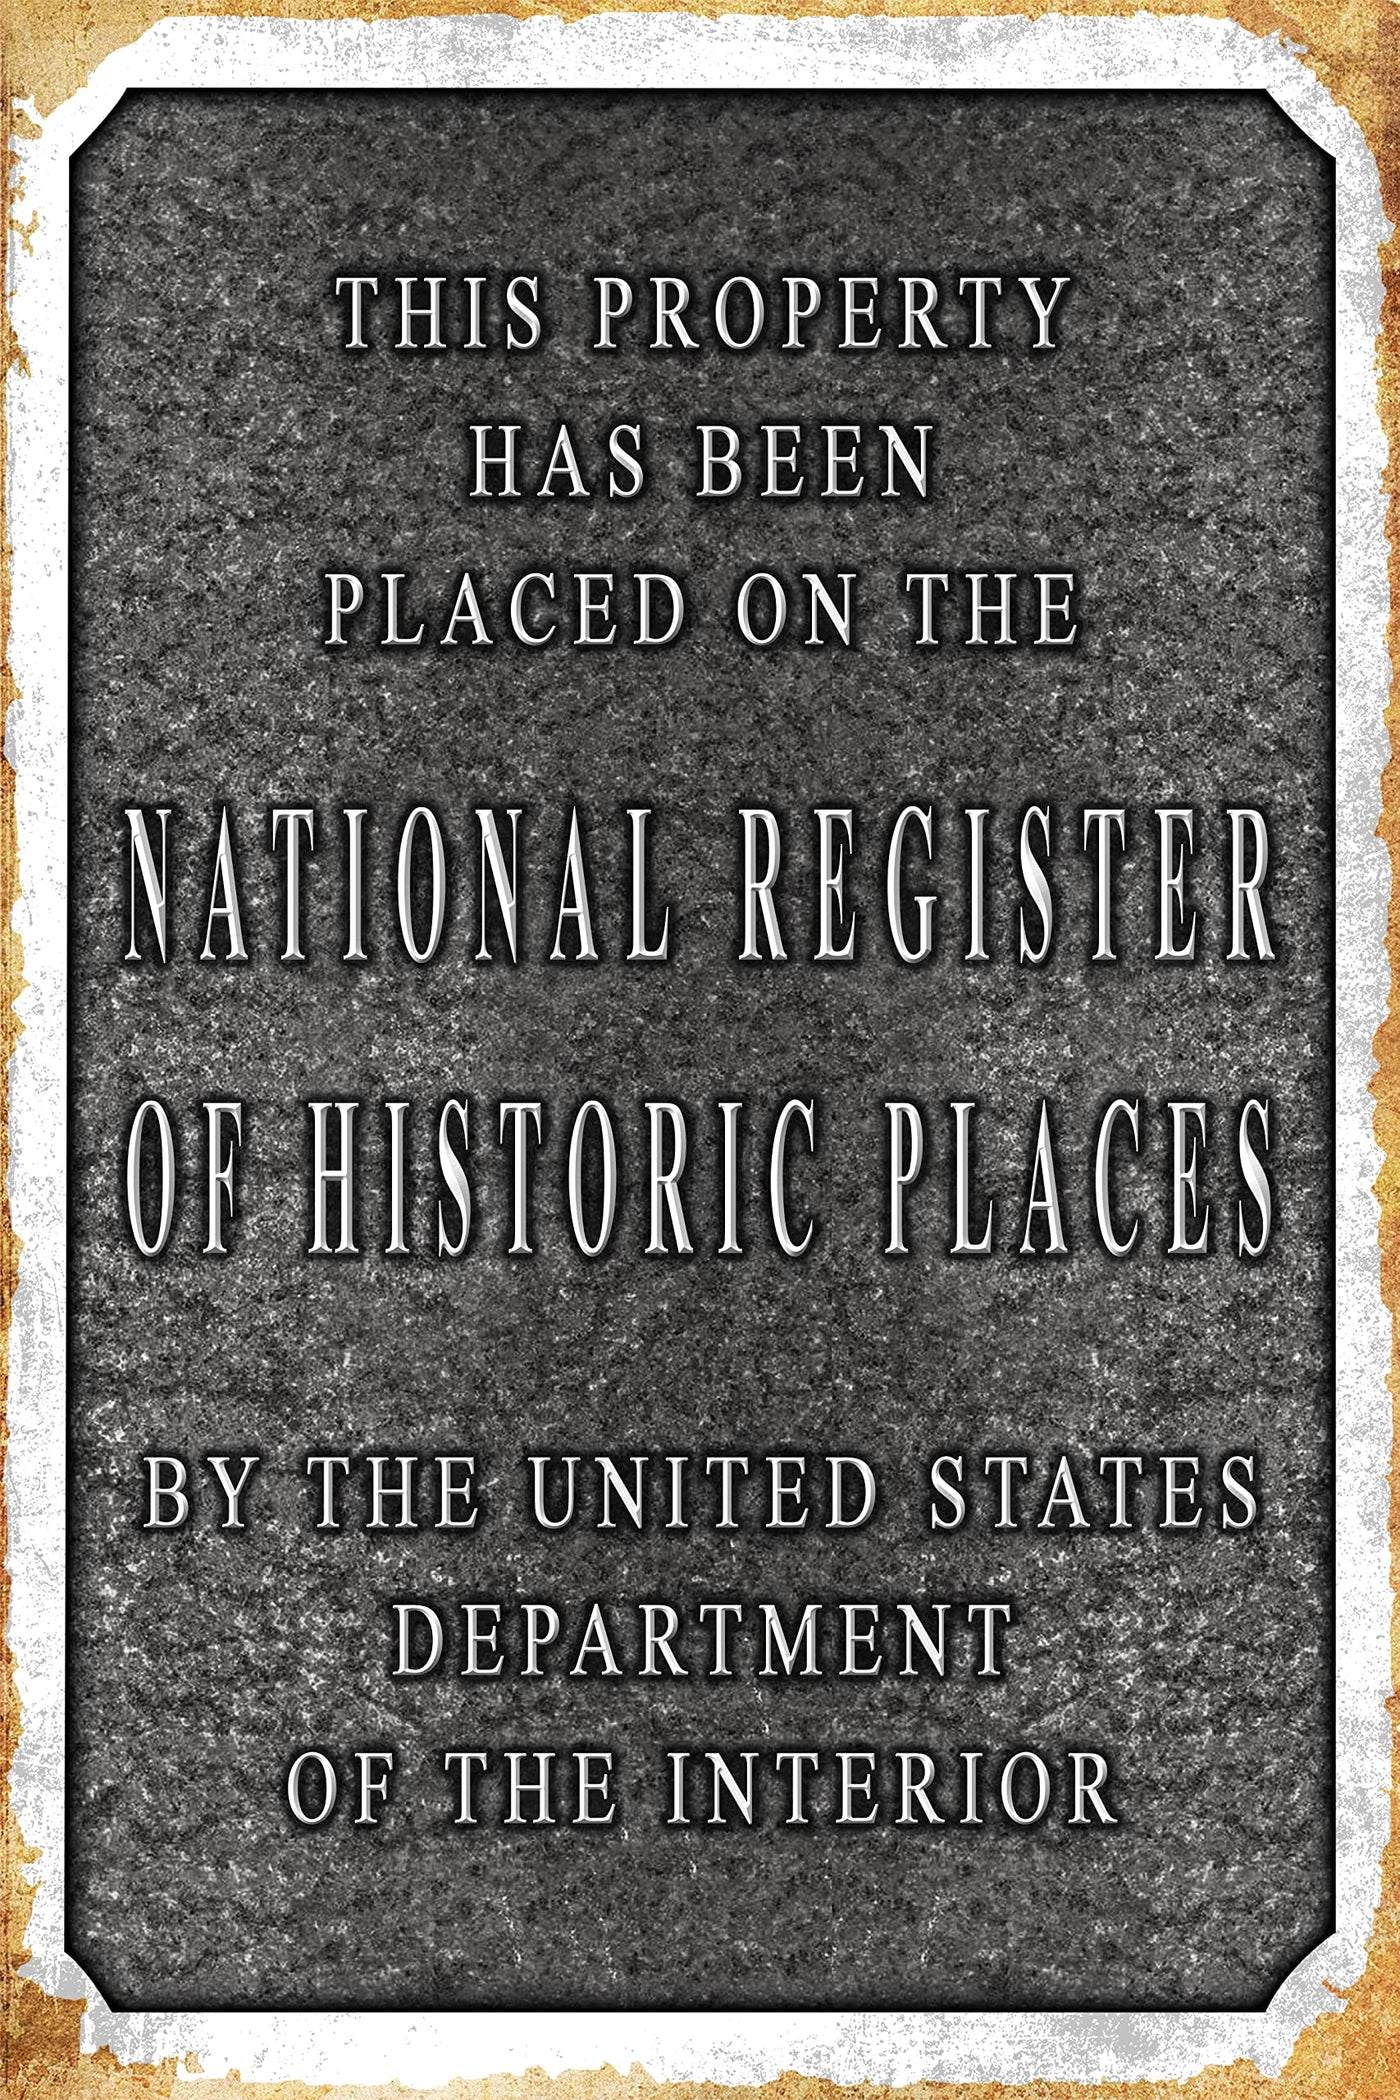 This Property Placed on National Register of Historic Places Metal Signs Vintage Wall Art -8 x 12" Funny Rustic Sign for Bar-Man Cave-Shop. Retro Tin Sign for Home, Office, Political Decor & Gifts!